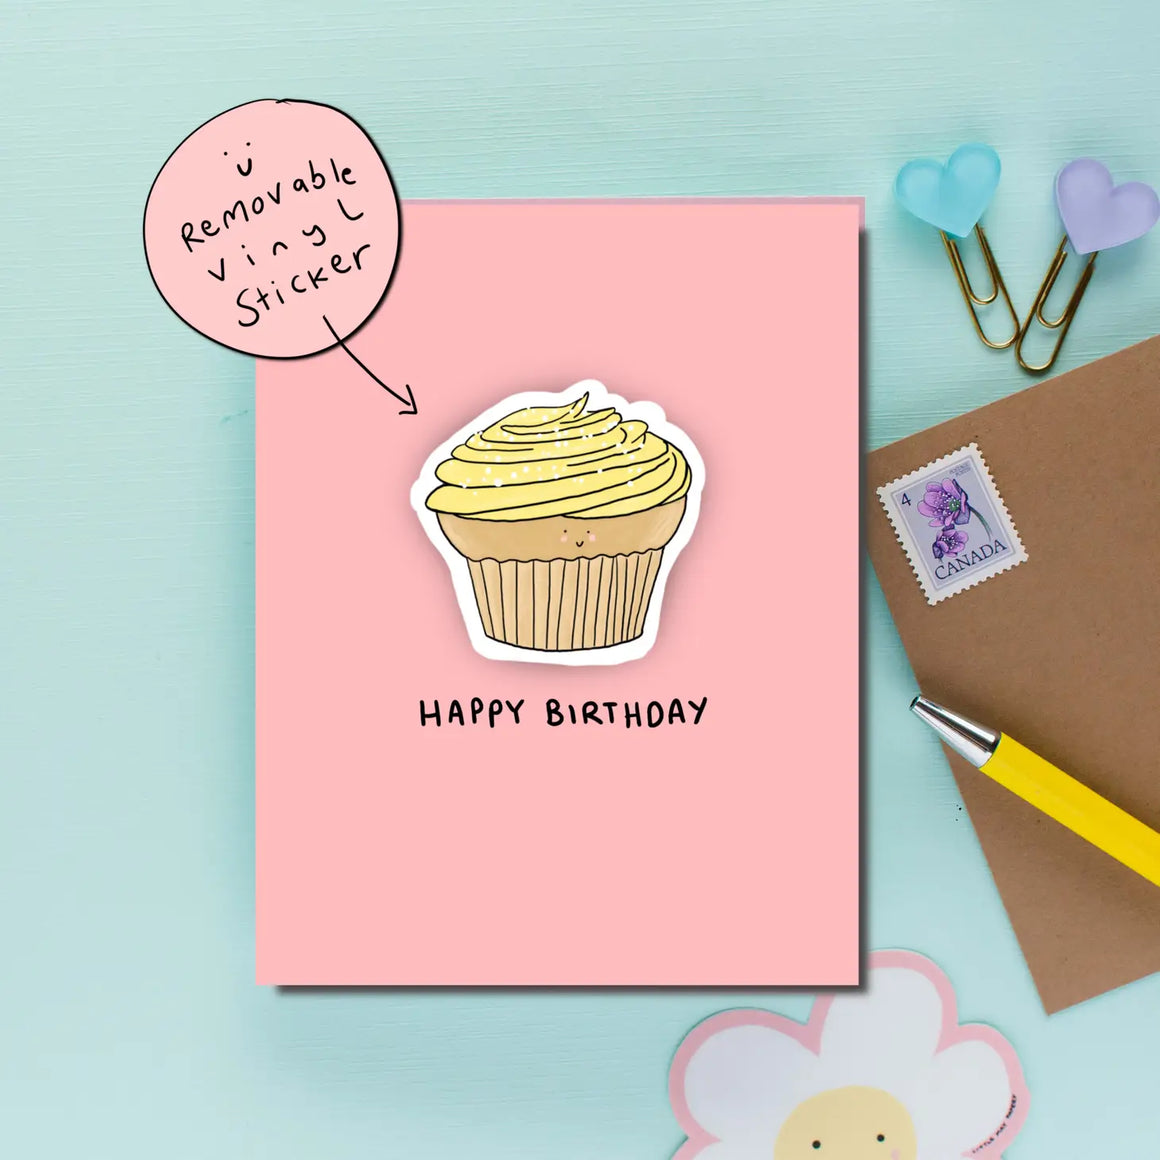 Cupcake greeting card with removable cupcake vinyl sticker